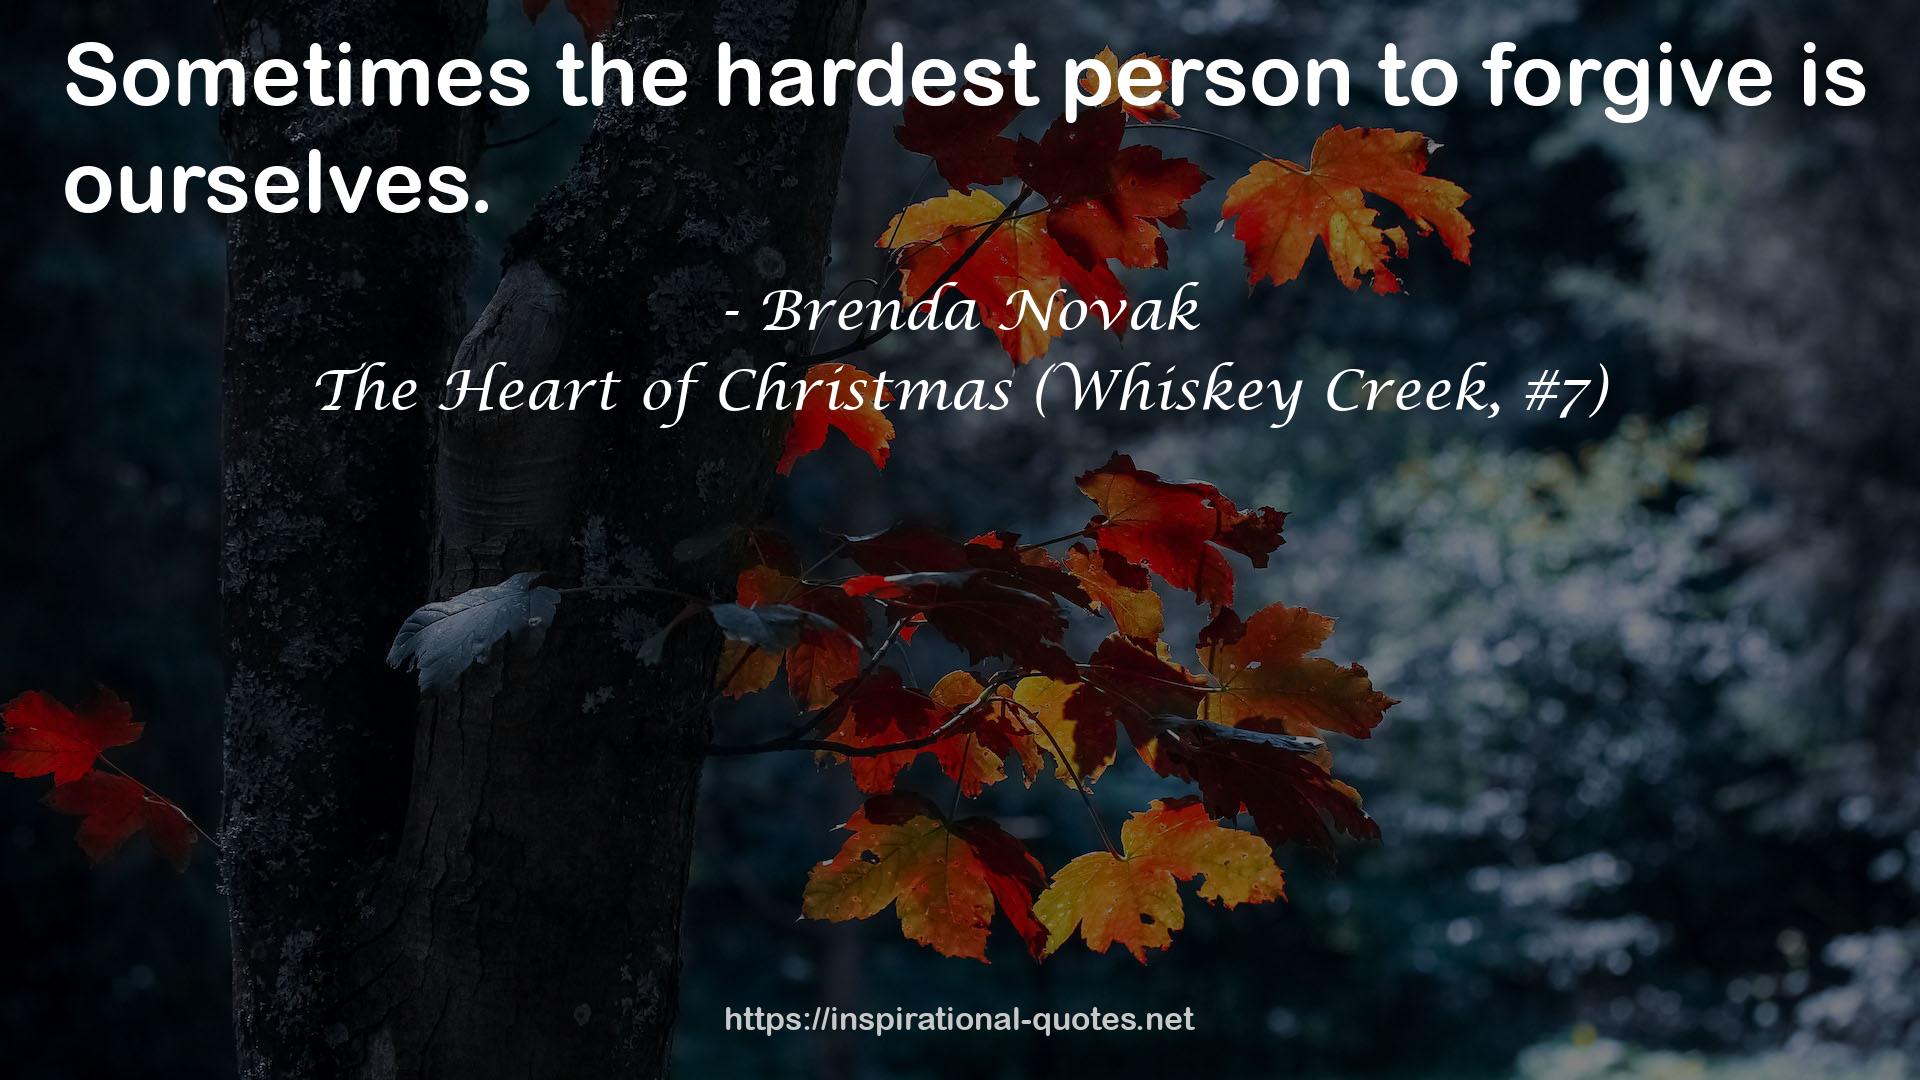 The Heart of Christmas (Whiskey Creek, #7) QUOTES